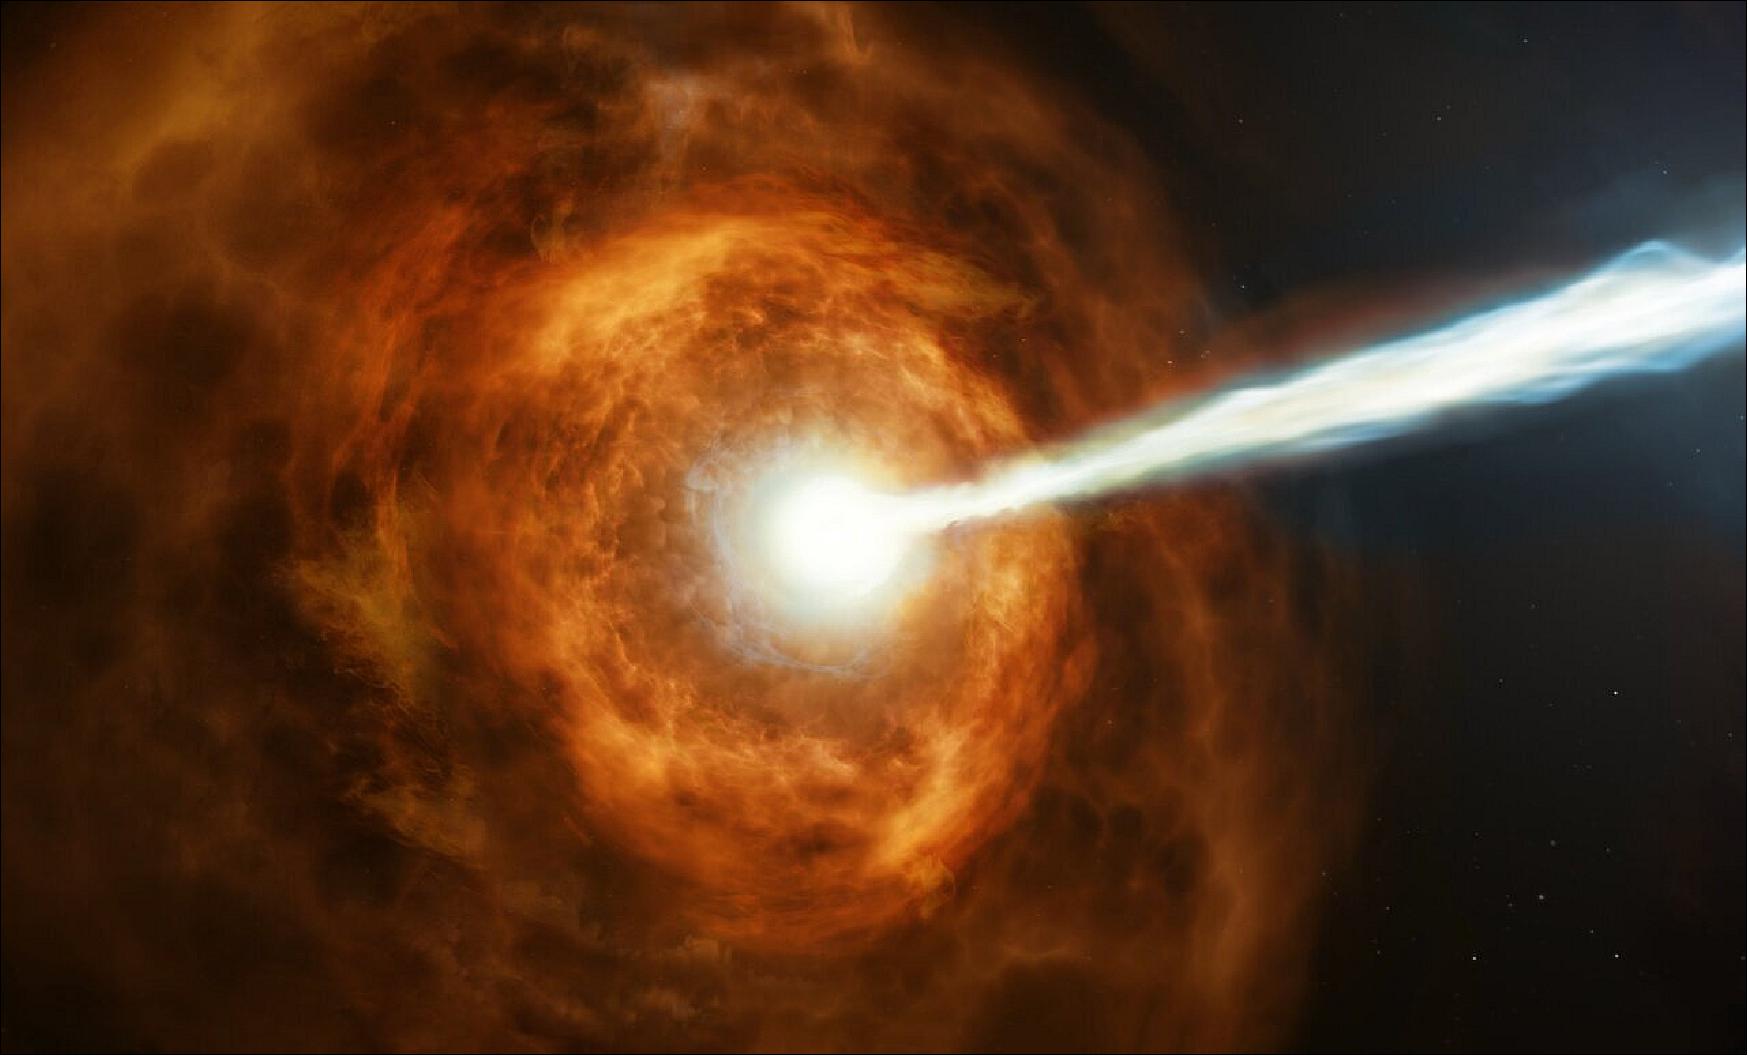 Figure 8: New observations (artist's impression) from the NASA/ESA Hubble Space Telescope have investigated the nature of the powerful gamma-ray burst GRB 190114C by studying its environment (image credit: NASA, ESA, Hubble, M. Kornmesser)